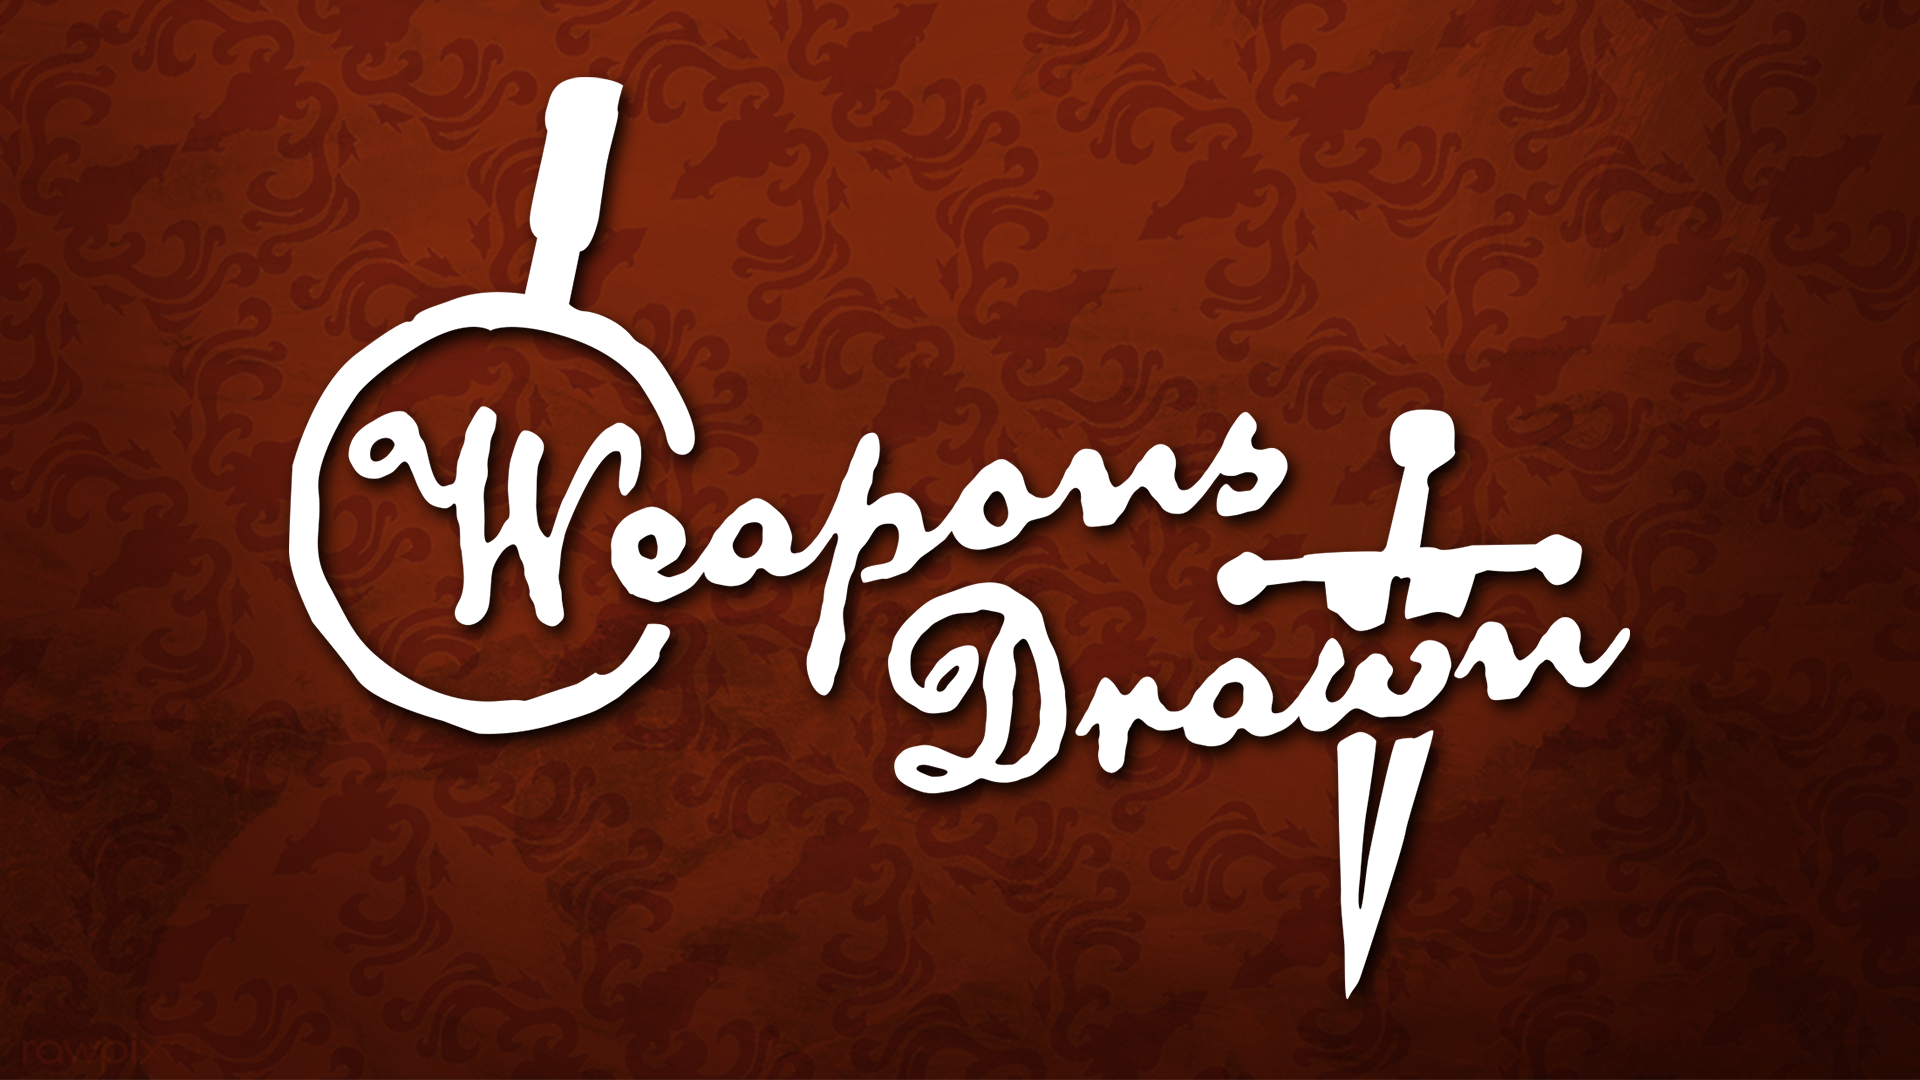 Weapons Drawn: Belle of the Ball